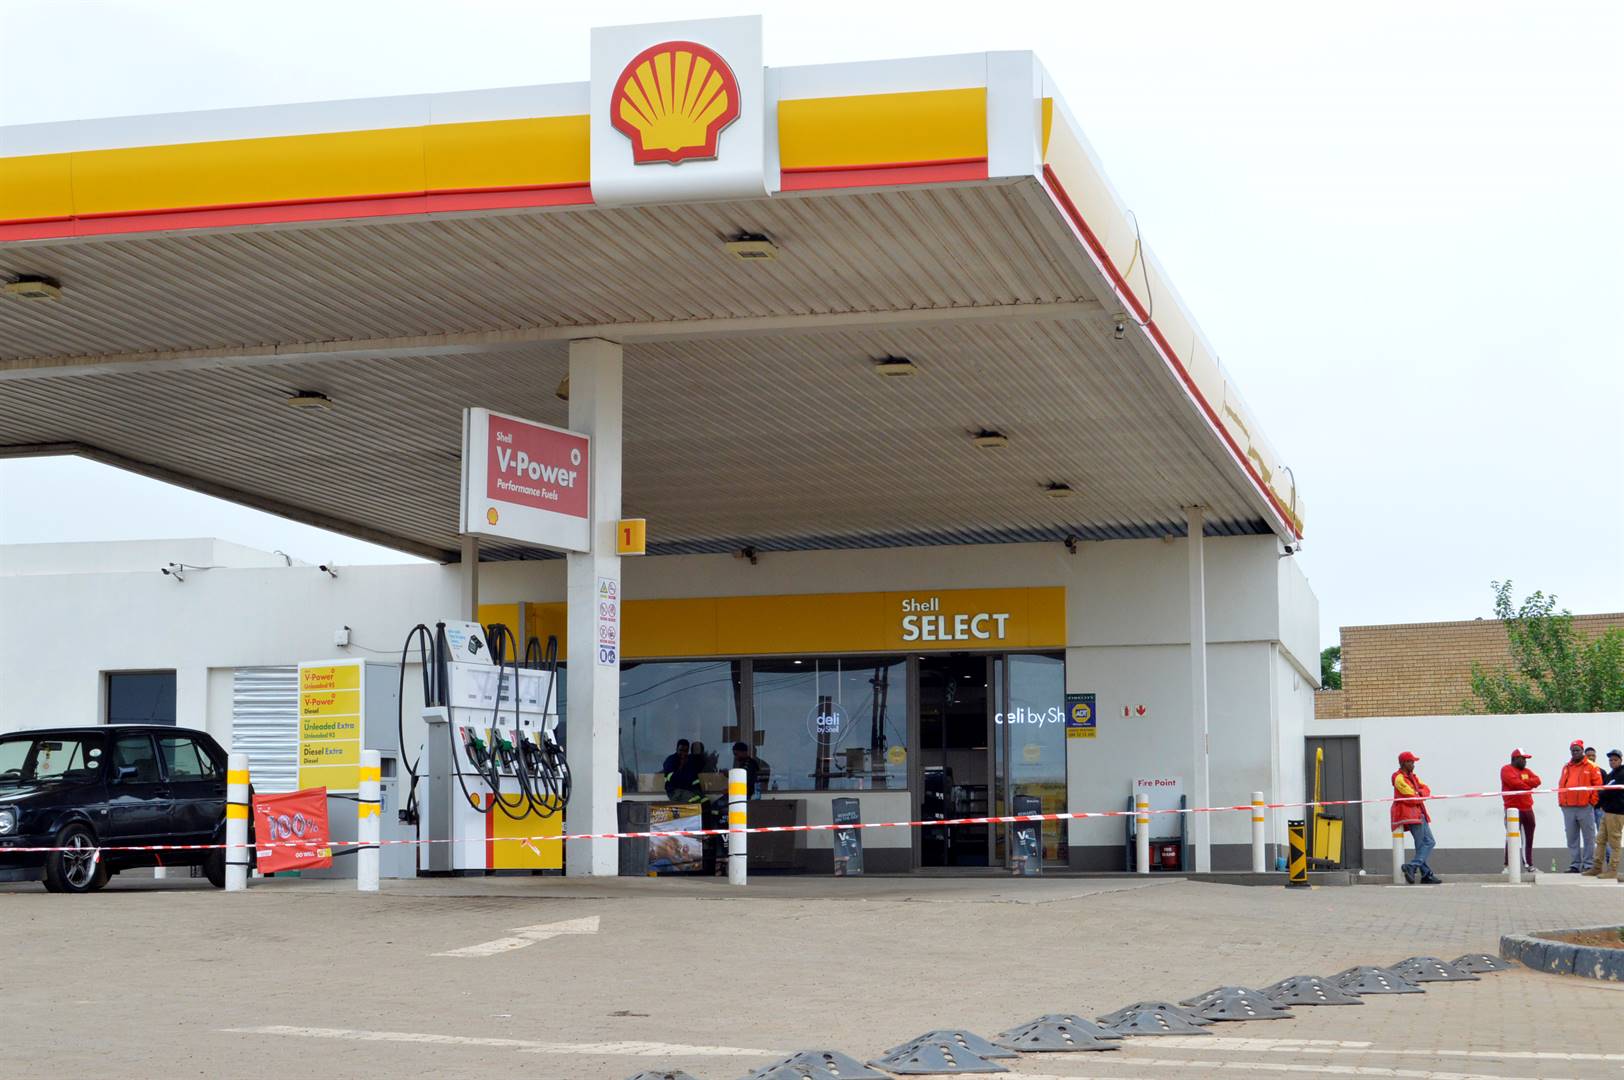 Shell petrol garage was also hit in the early hours of Sunday morning by 6 suspects. Photo by Tumelo Mofokeng 